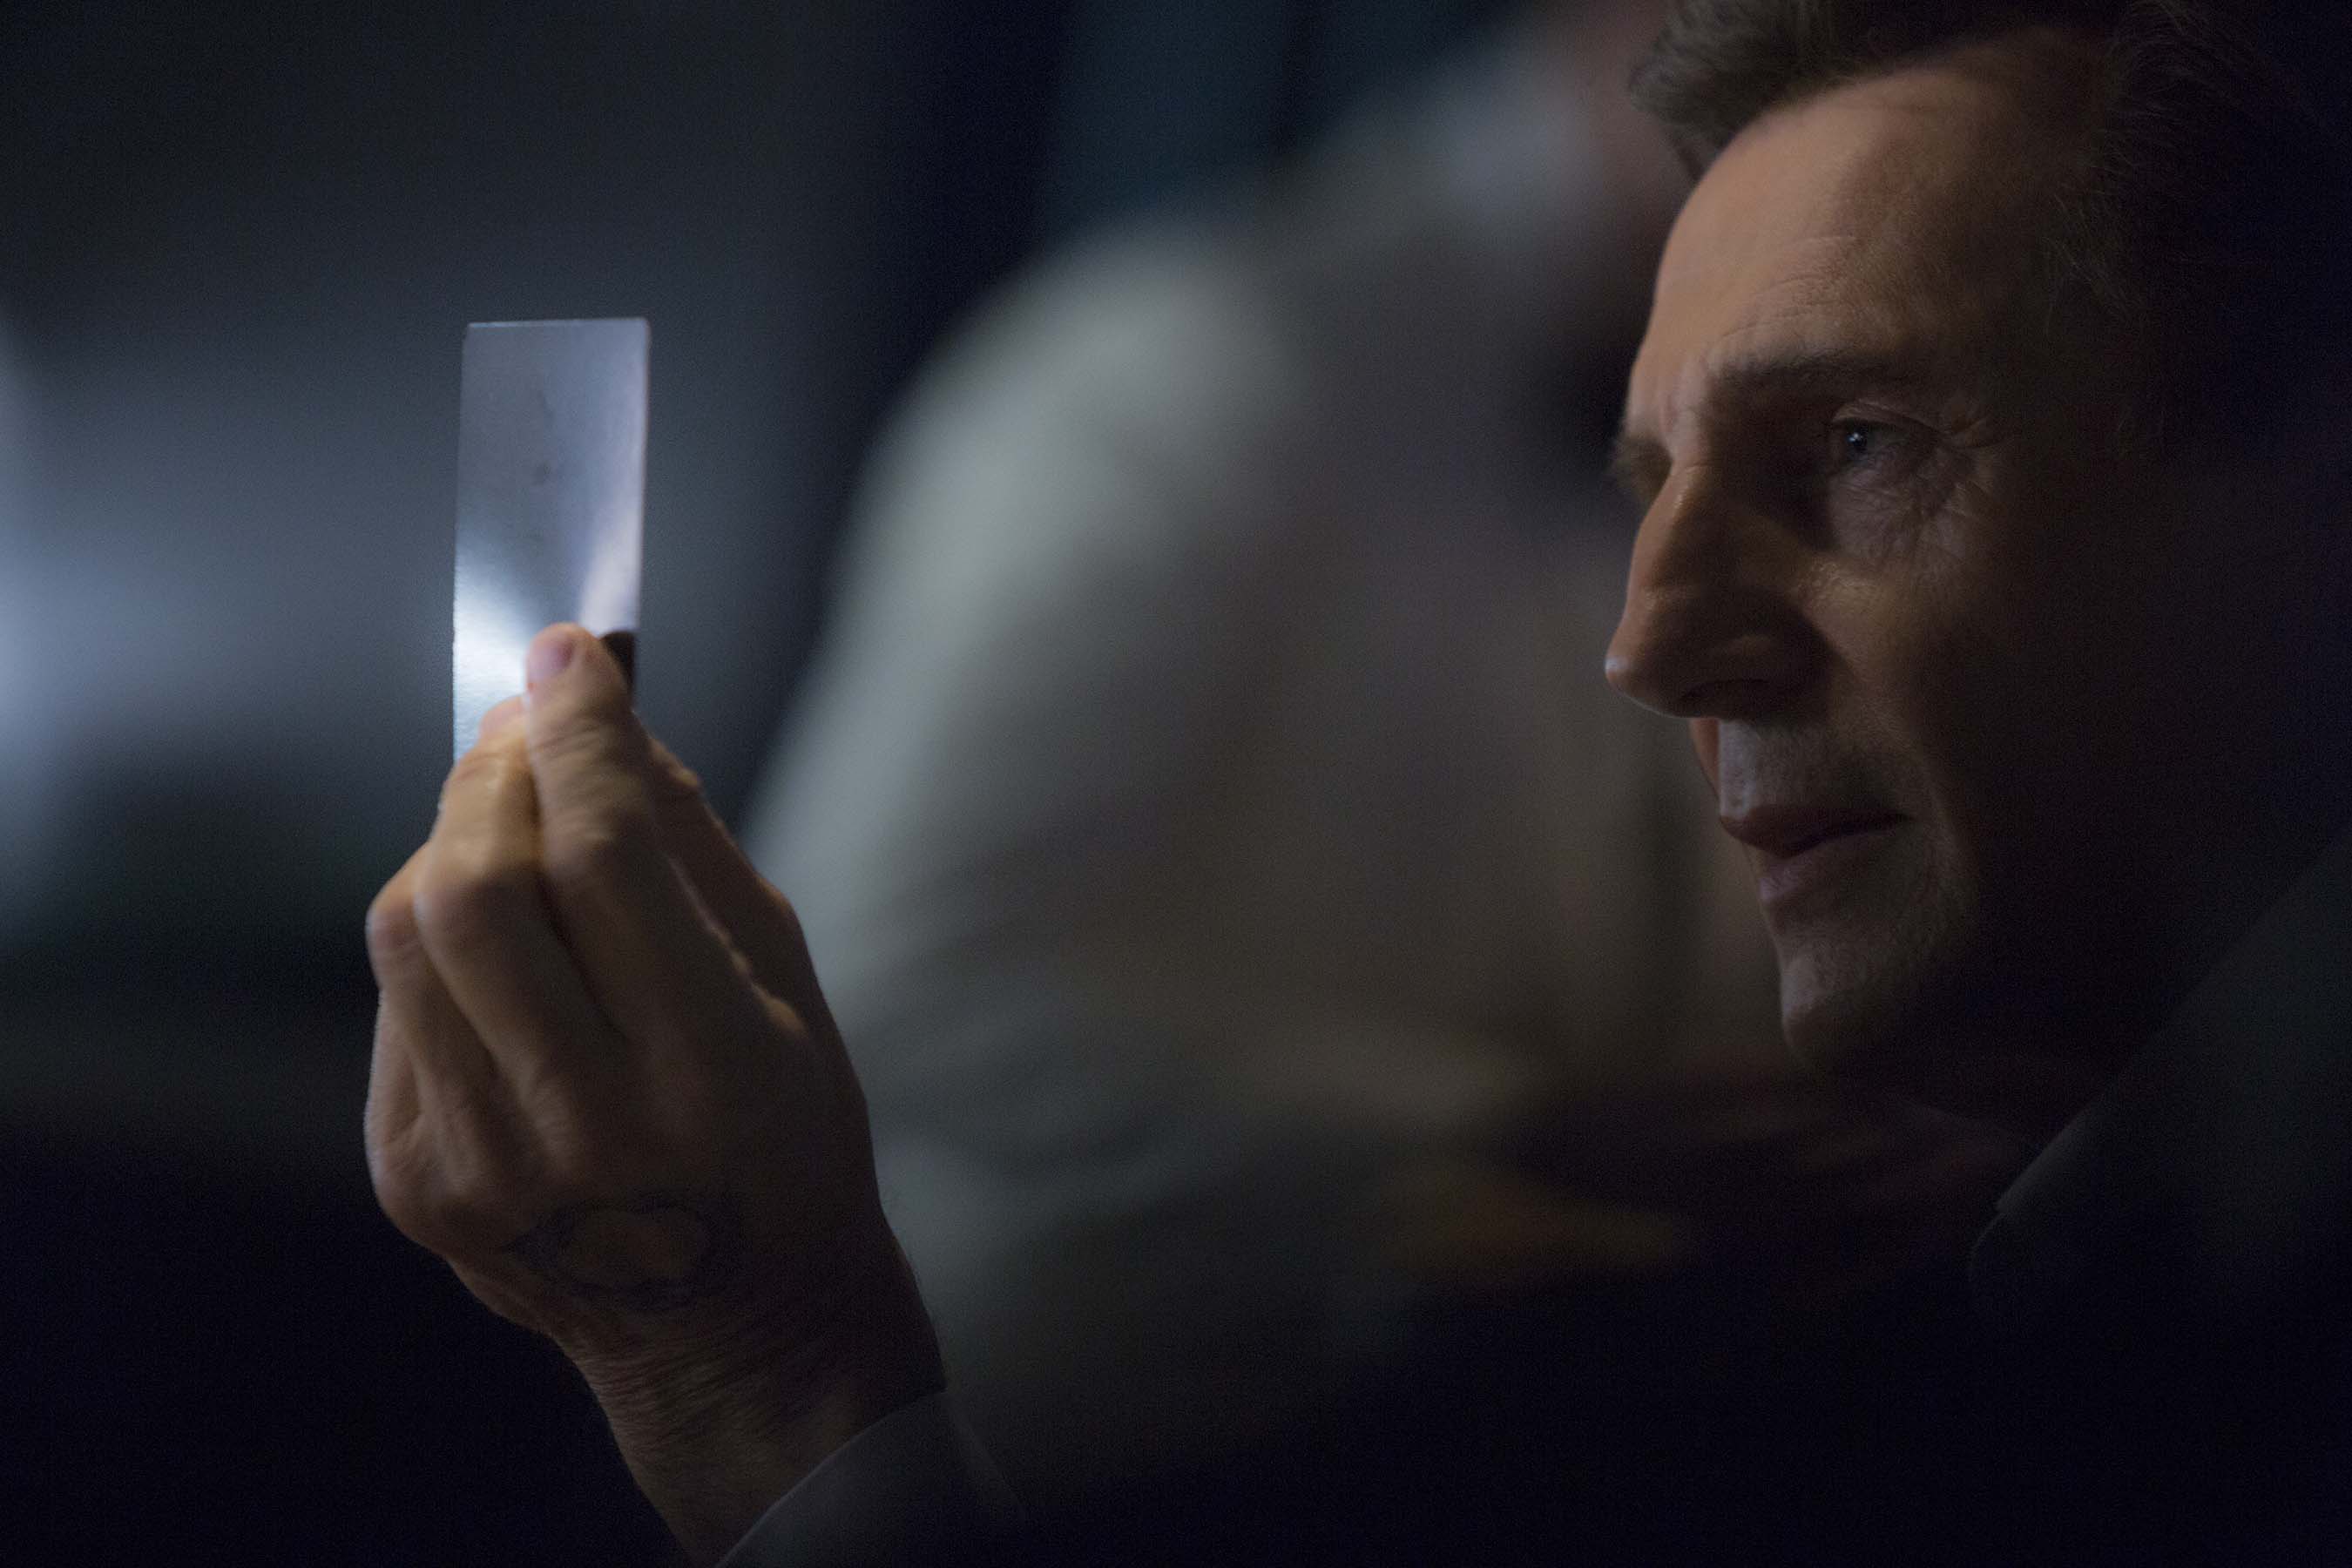 Liam Neeson's character is "the man from the future" and is tasked with releasing the future of television to the world for the masses to enjoy today, much like LG has continued to do through its pioneering innovation in the OLED TV category.